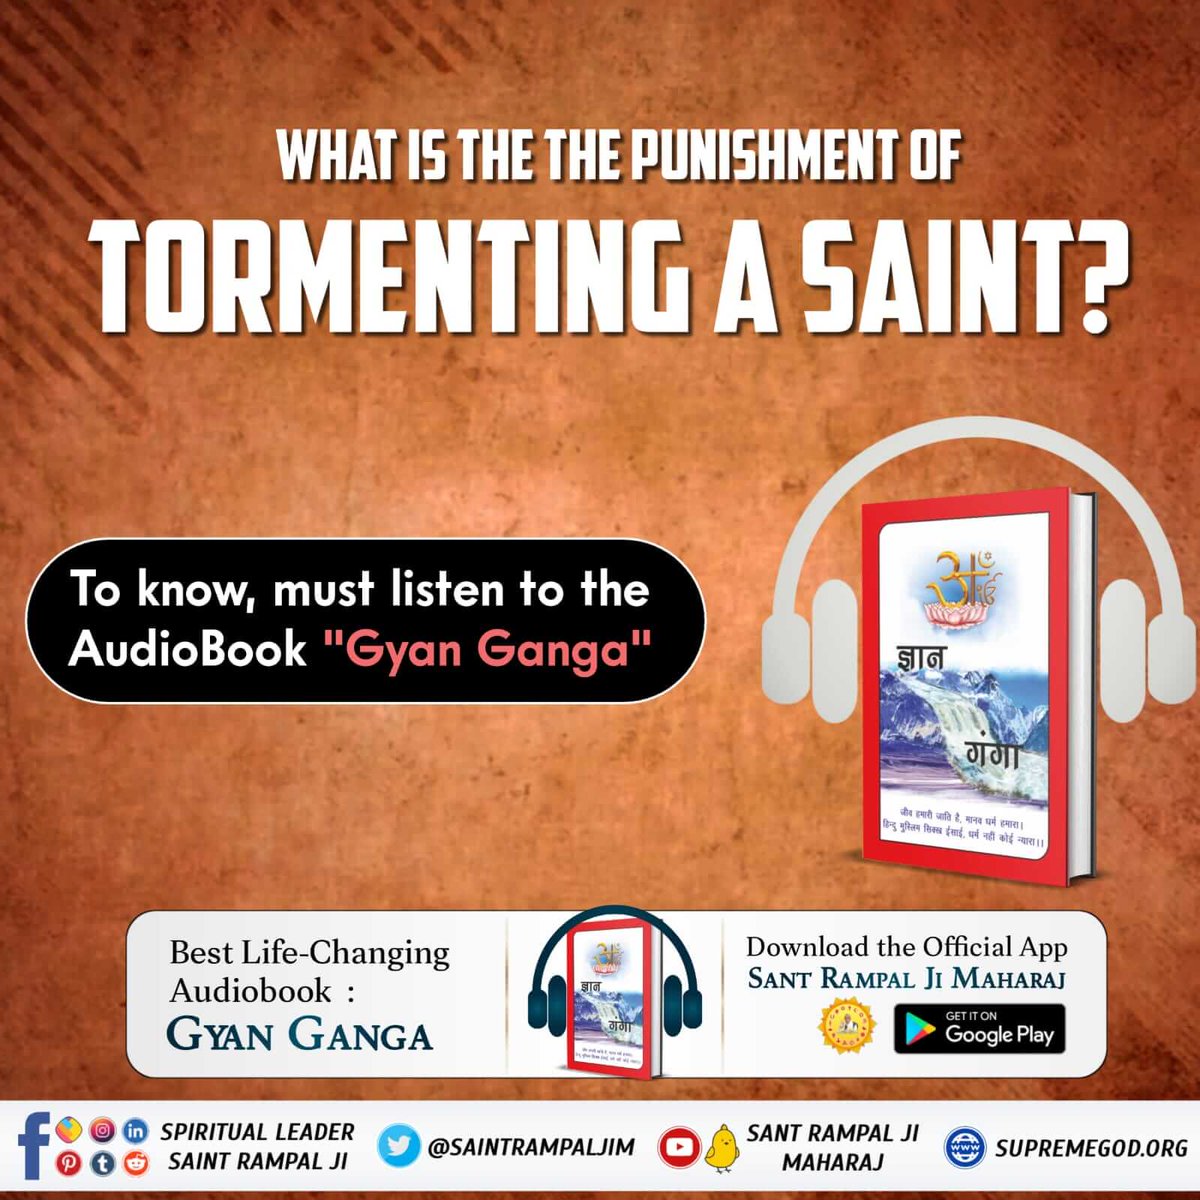 #GyanGanga_AudioBook
What is the punishment of tormenting a saint?
To know, listen to the audio book 'Gyan Ganga'.